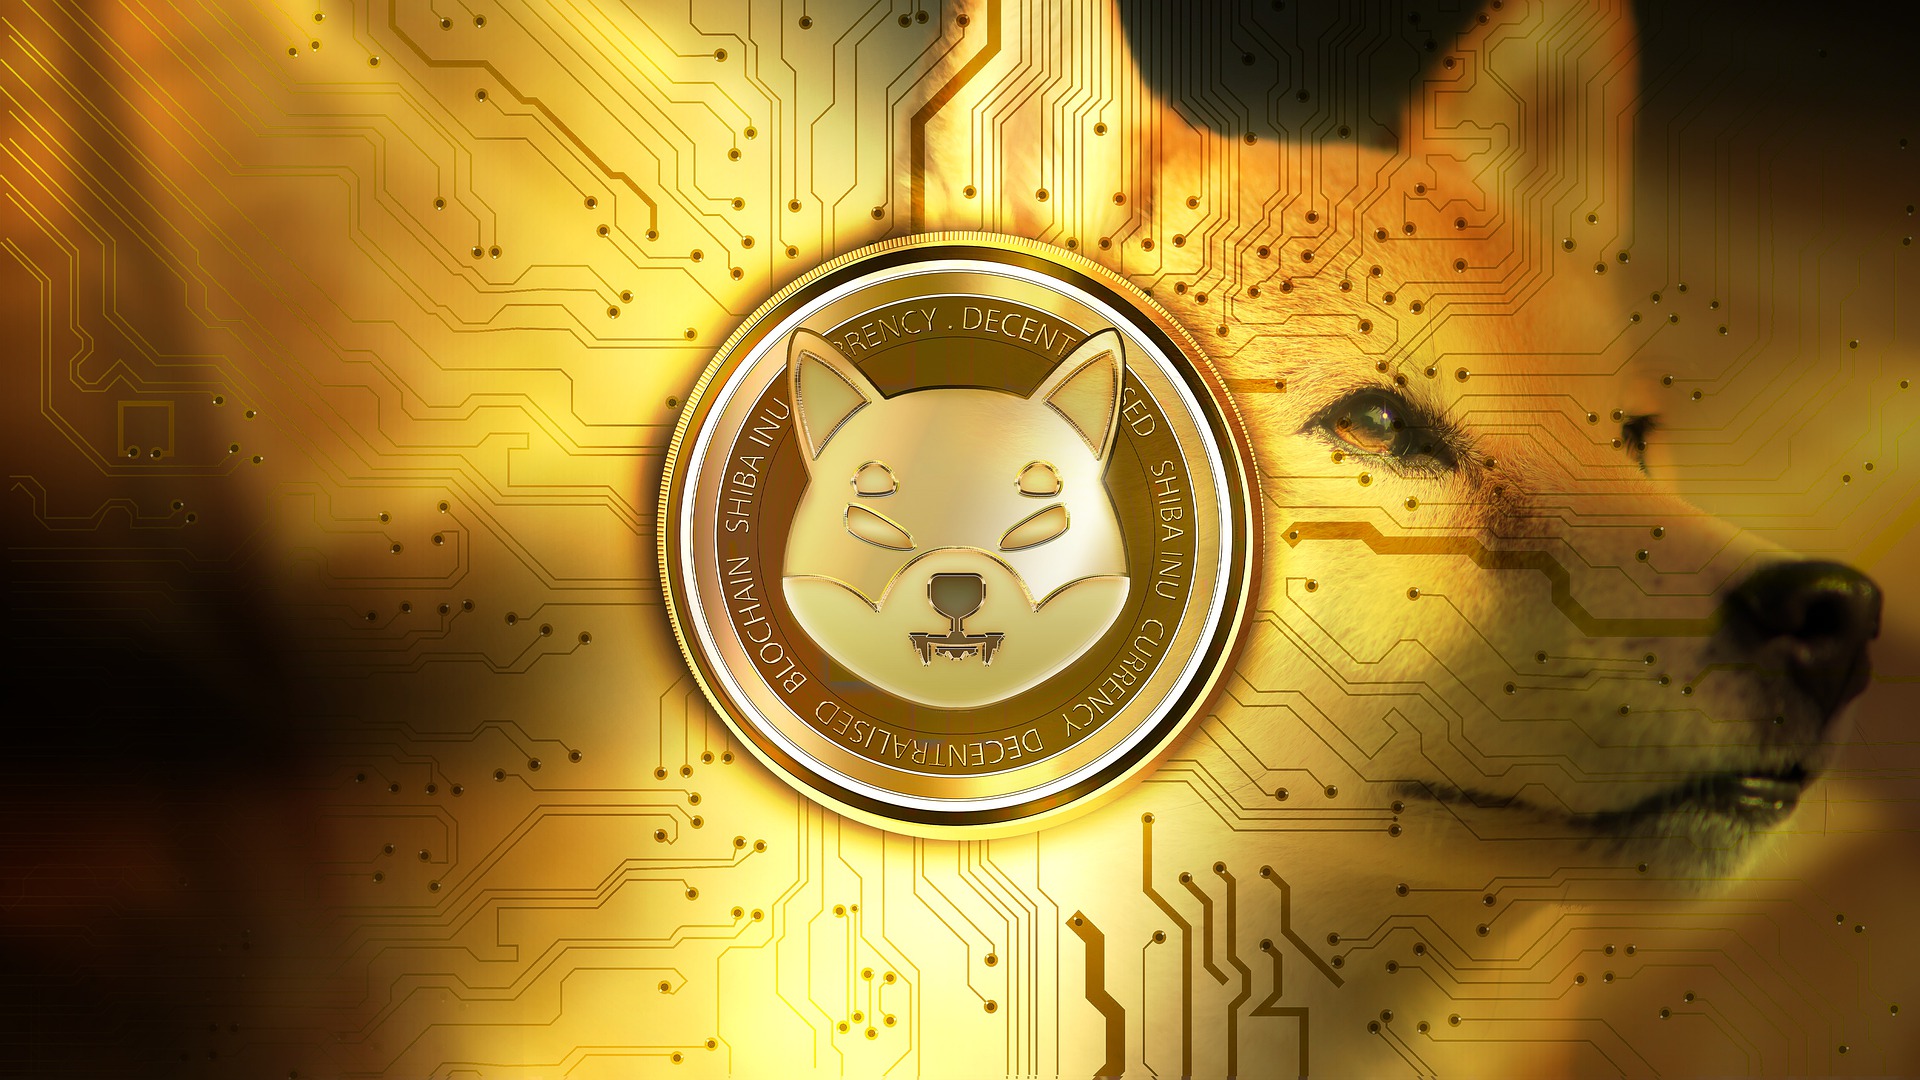 Online Electronics Retailer Newegg will Accept Shiba Inu During the Holidays